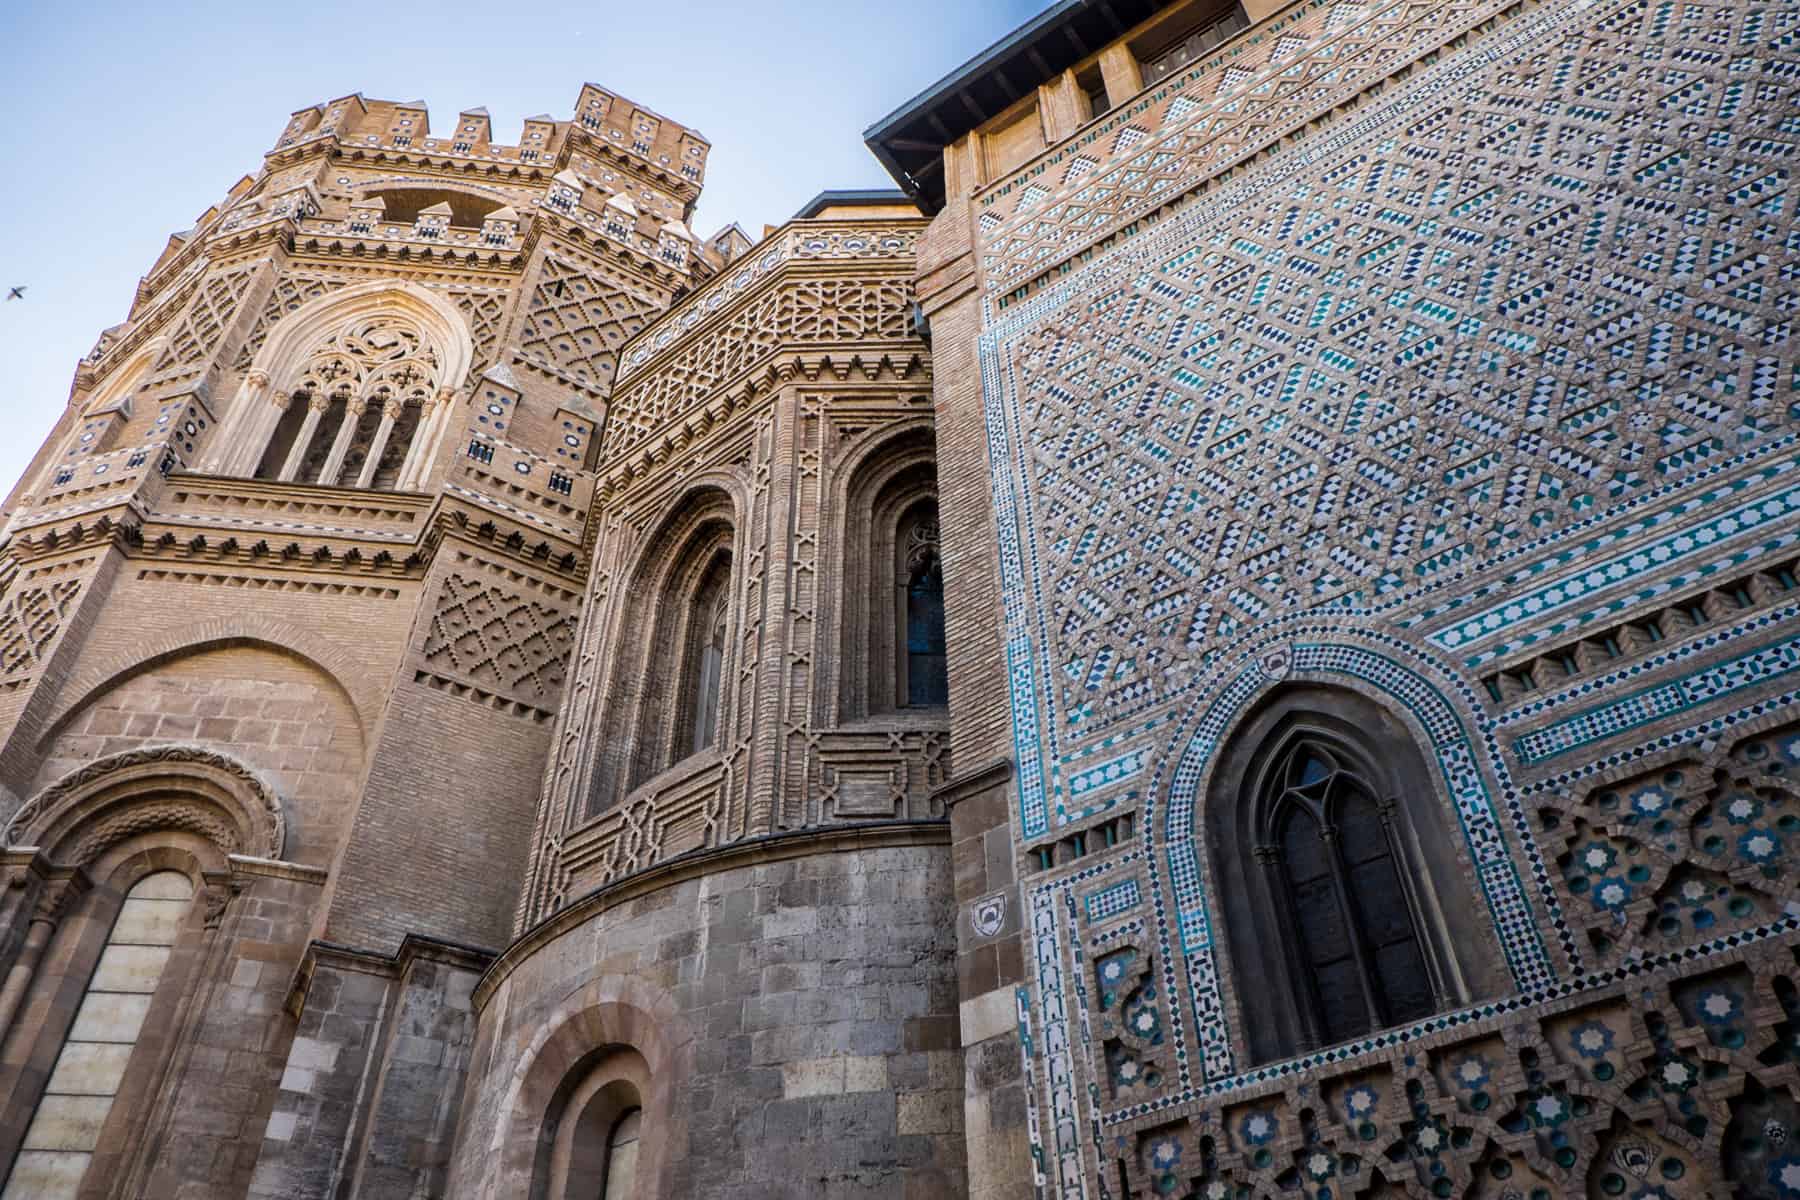 The outer walls of a church building and church tower covered in intricately patterned blue and brown tiles.